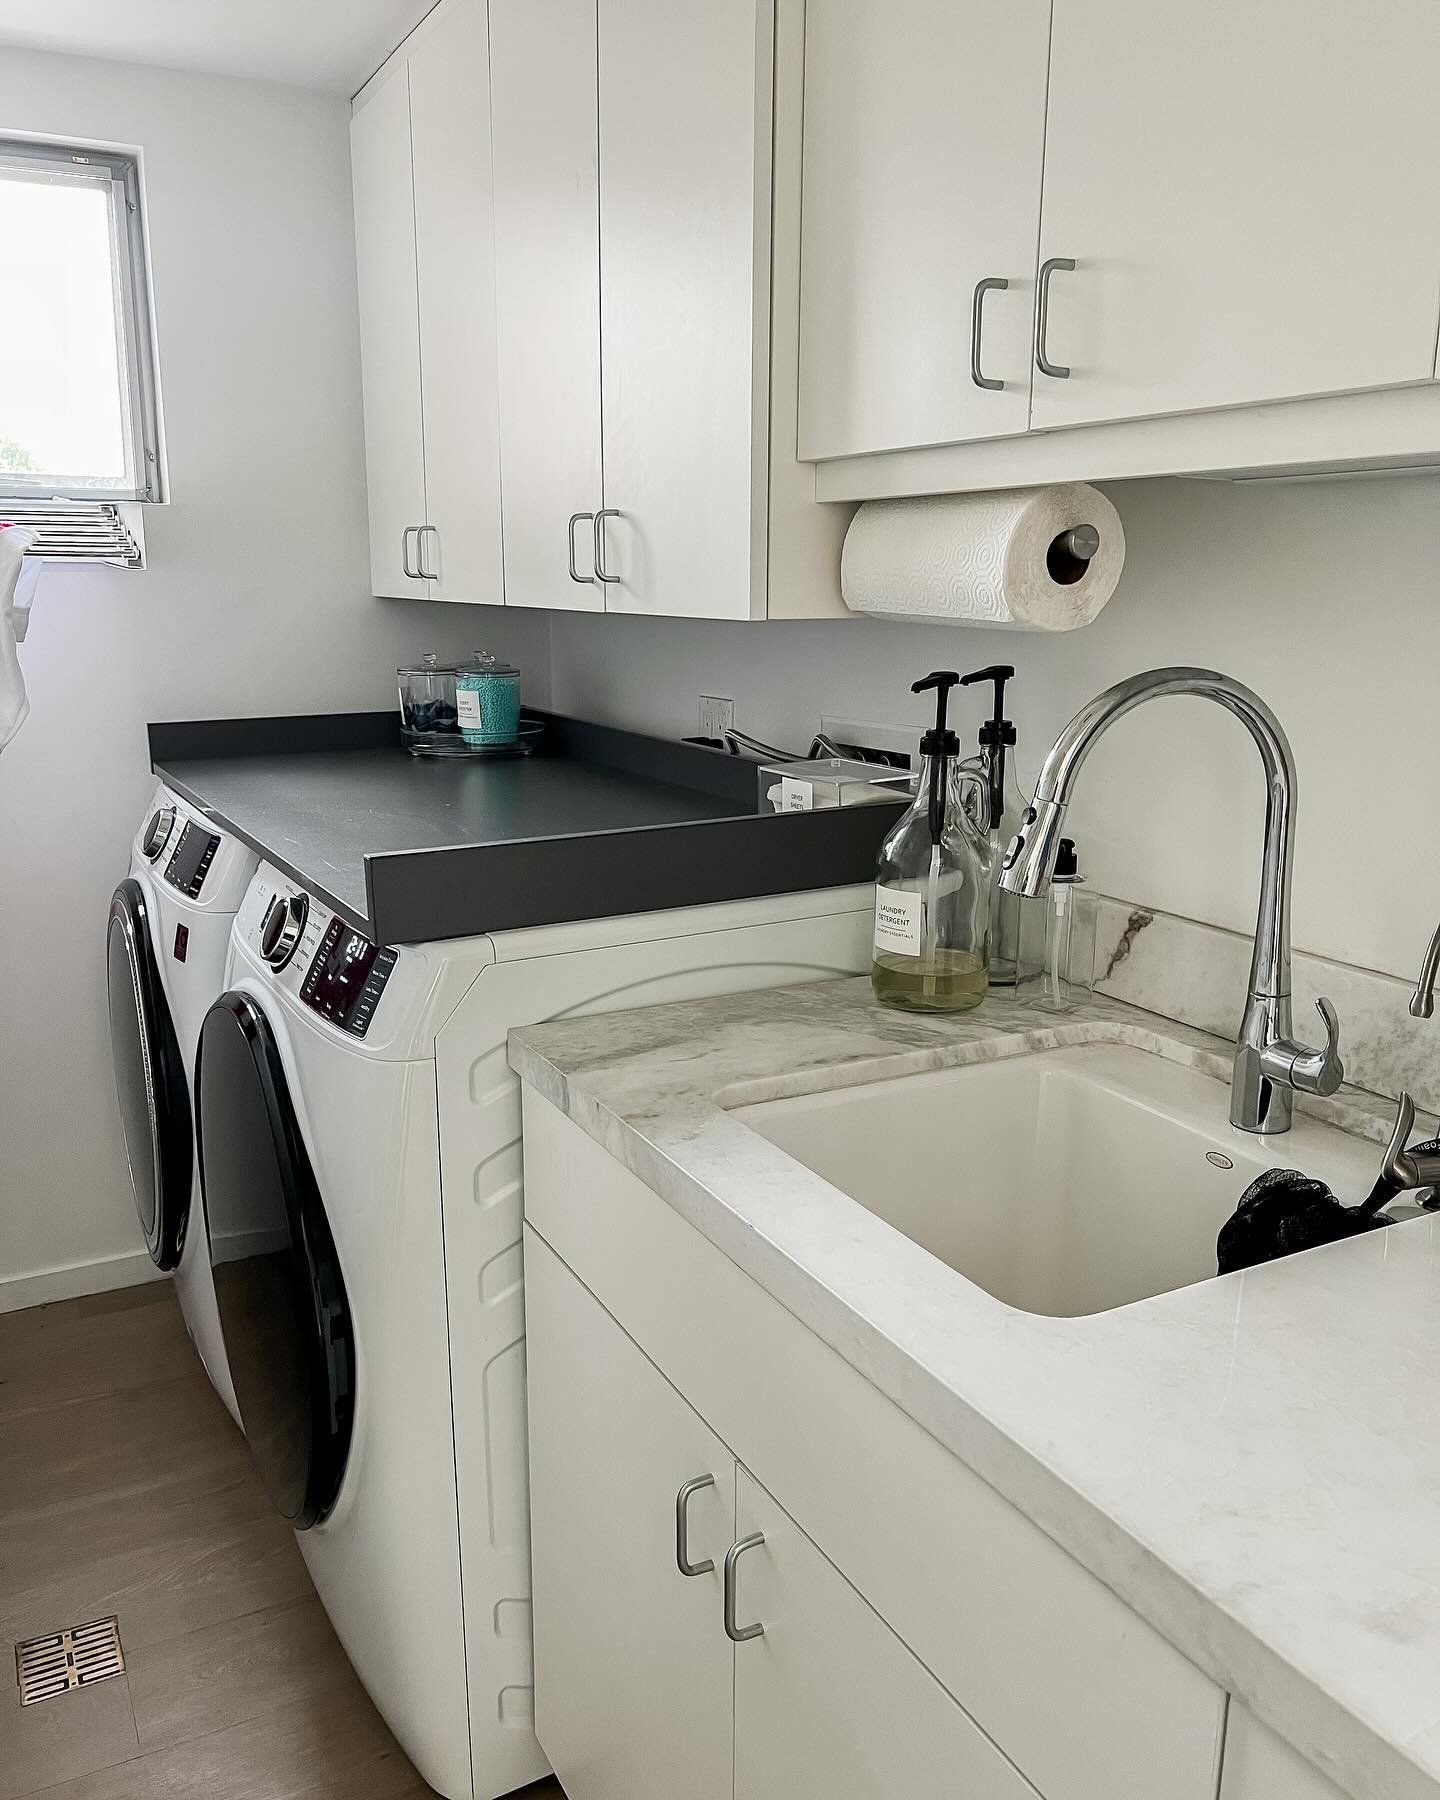 ✨L A U N D R Y  R O O M ✨

👉🏻 Looking for a quick and easy way to upgrade your laundry room? 

💡If you have a front-loading washer/dryer, add a countertop! 

🧺 This can double your workspace, create a clean surface for folding, and just makes the